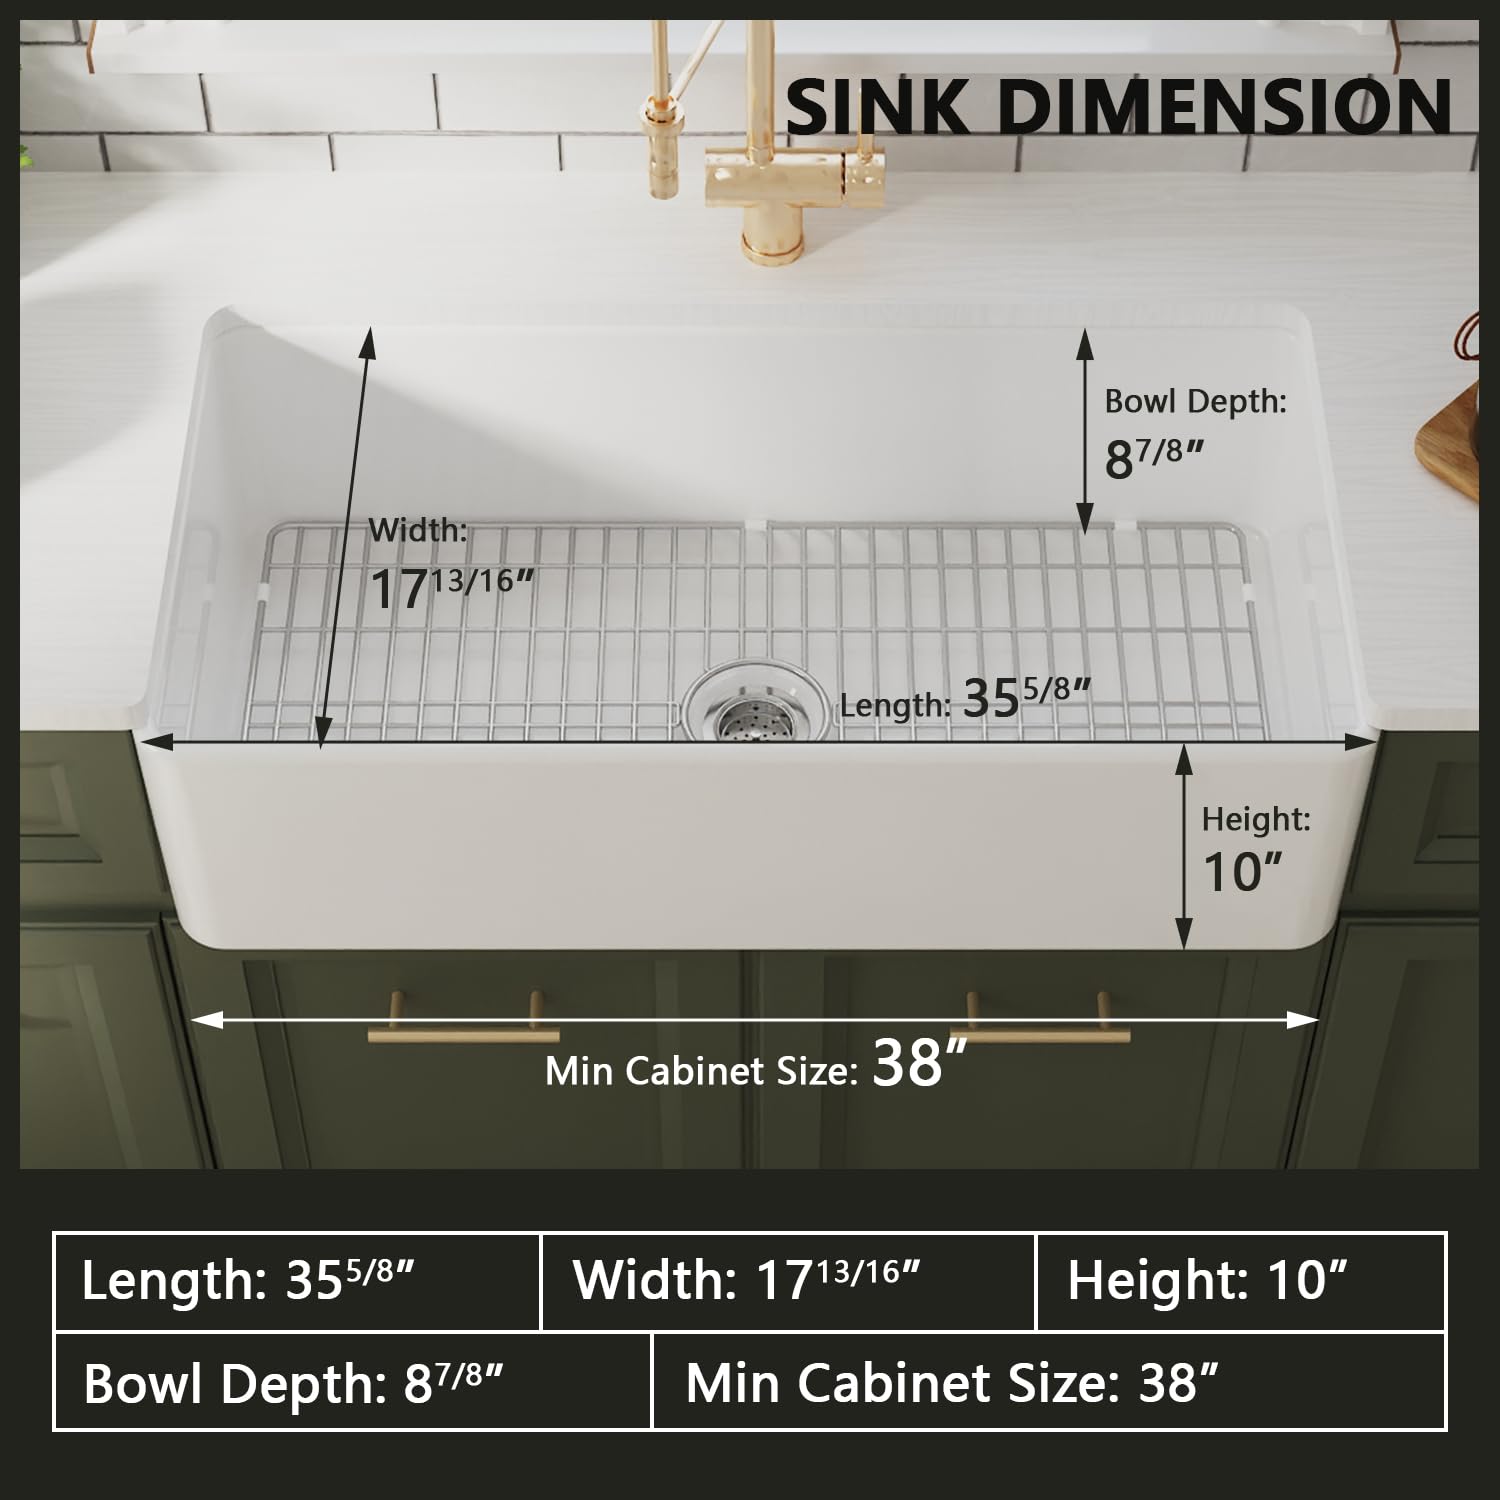 DeerValley Farmhouse Sink, DV-1K505 Grove 36"L x 18"W Fireclay Farmhouse Sink White Apron Front Deep Single Bowl Kitchen Sink with Sink Grid and Basket Strainer